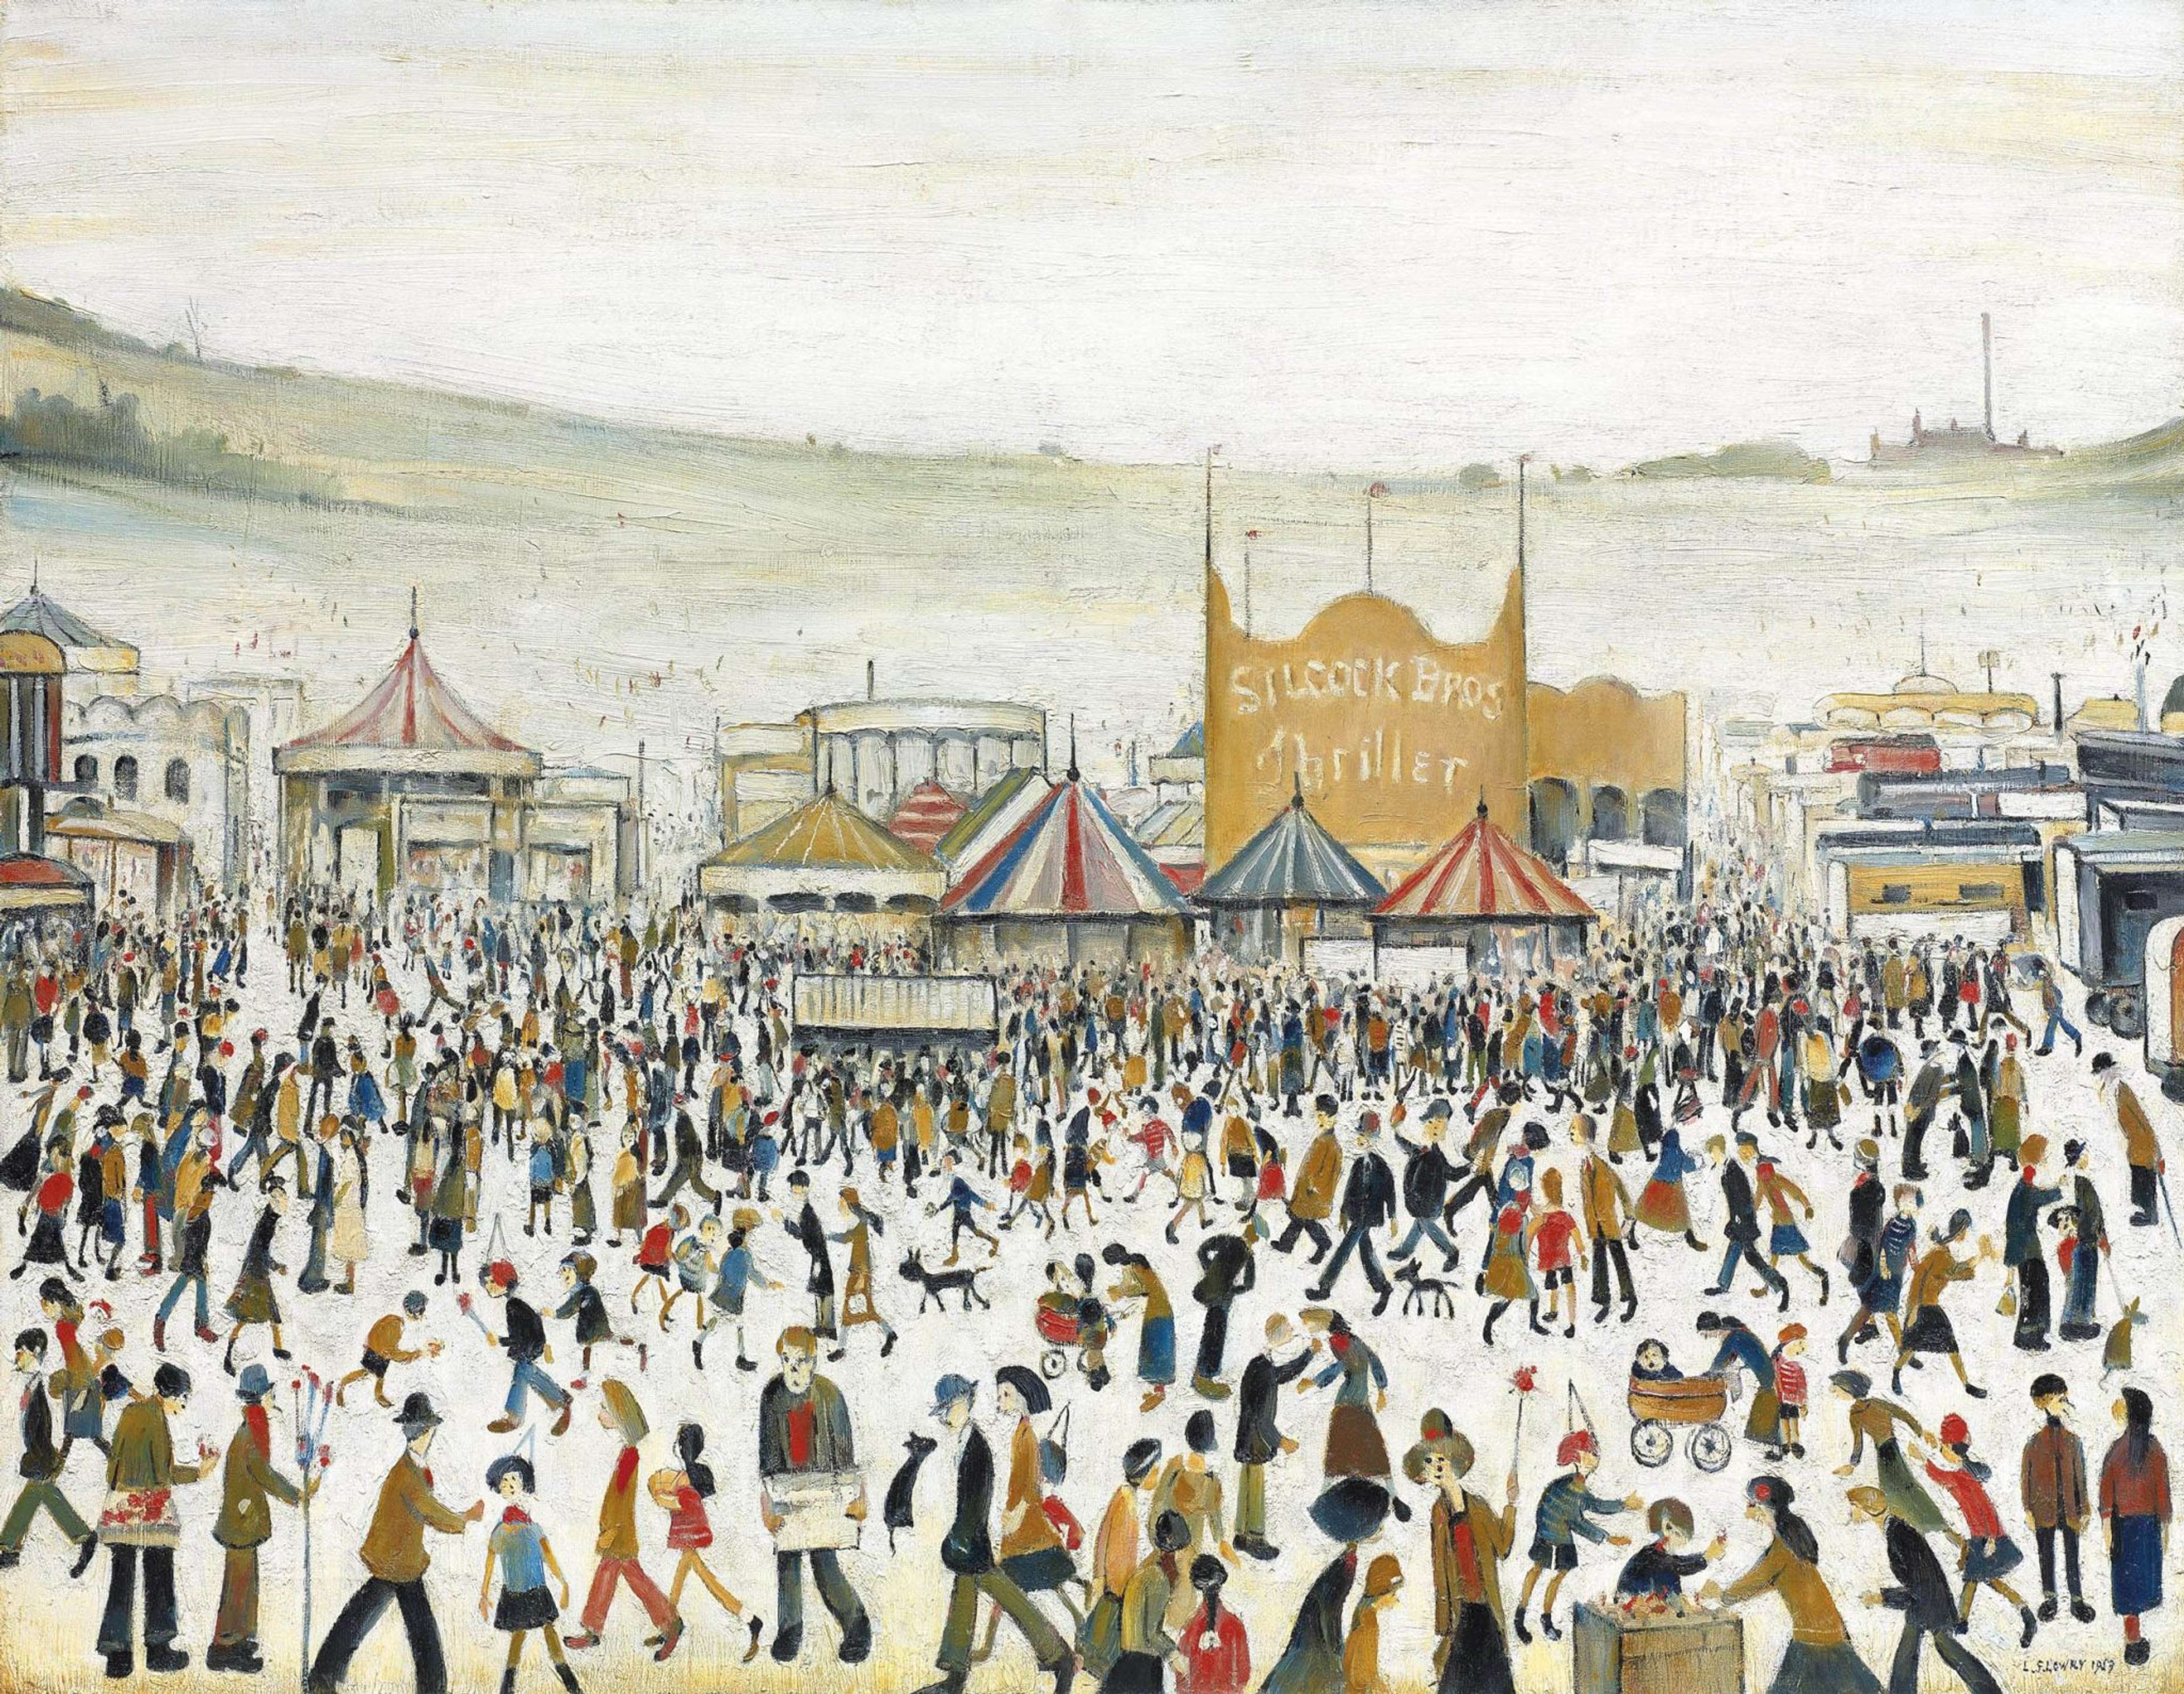 Fun Fair at Daisy Nook by L S Lowry